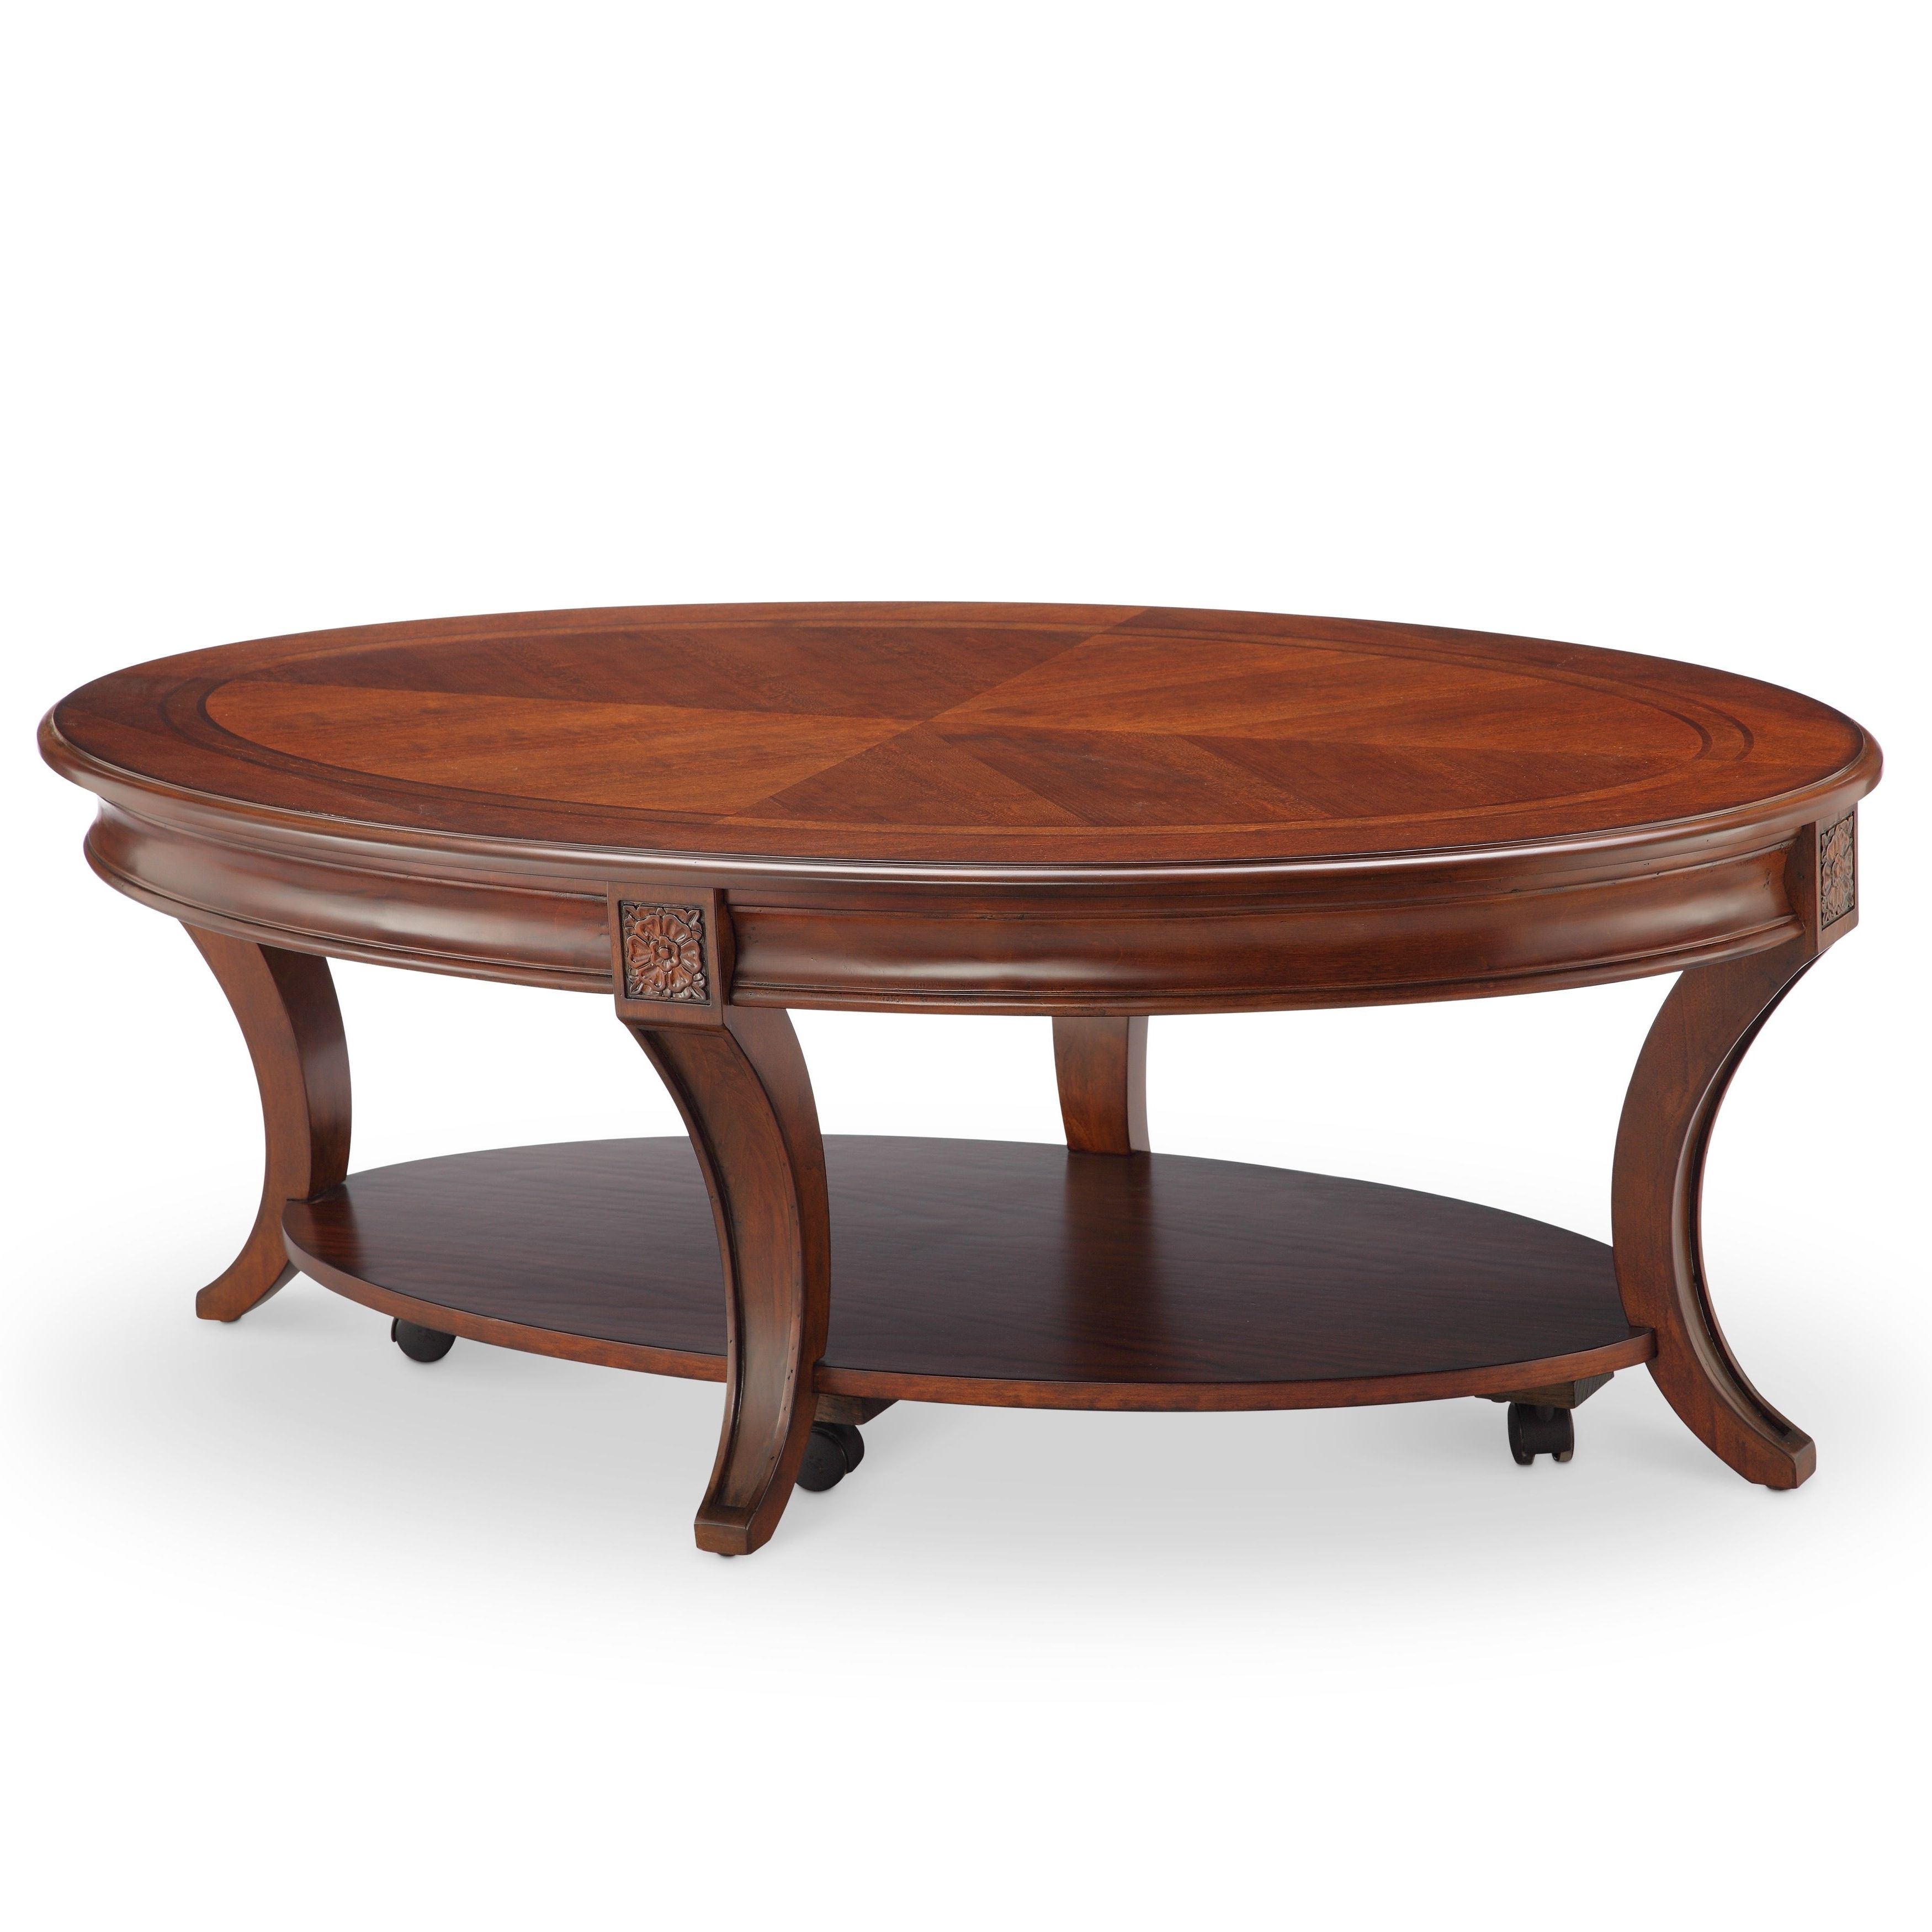 Winslet Cherry Finish Wood Oval Coffee Table With Casters Intended For Recent Cohler Traditional Brown Cherry Oval Coffee Tables (View 18 of 20)